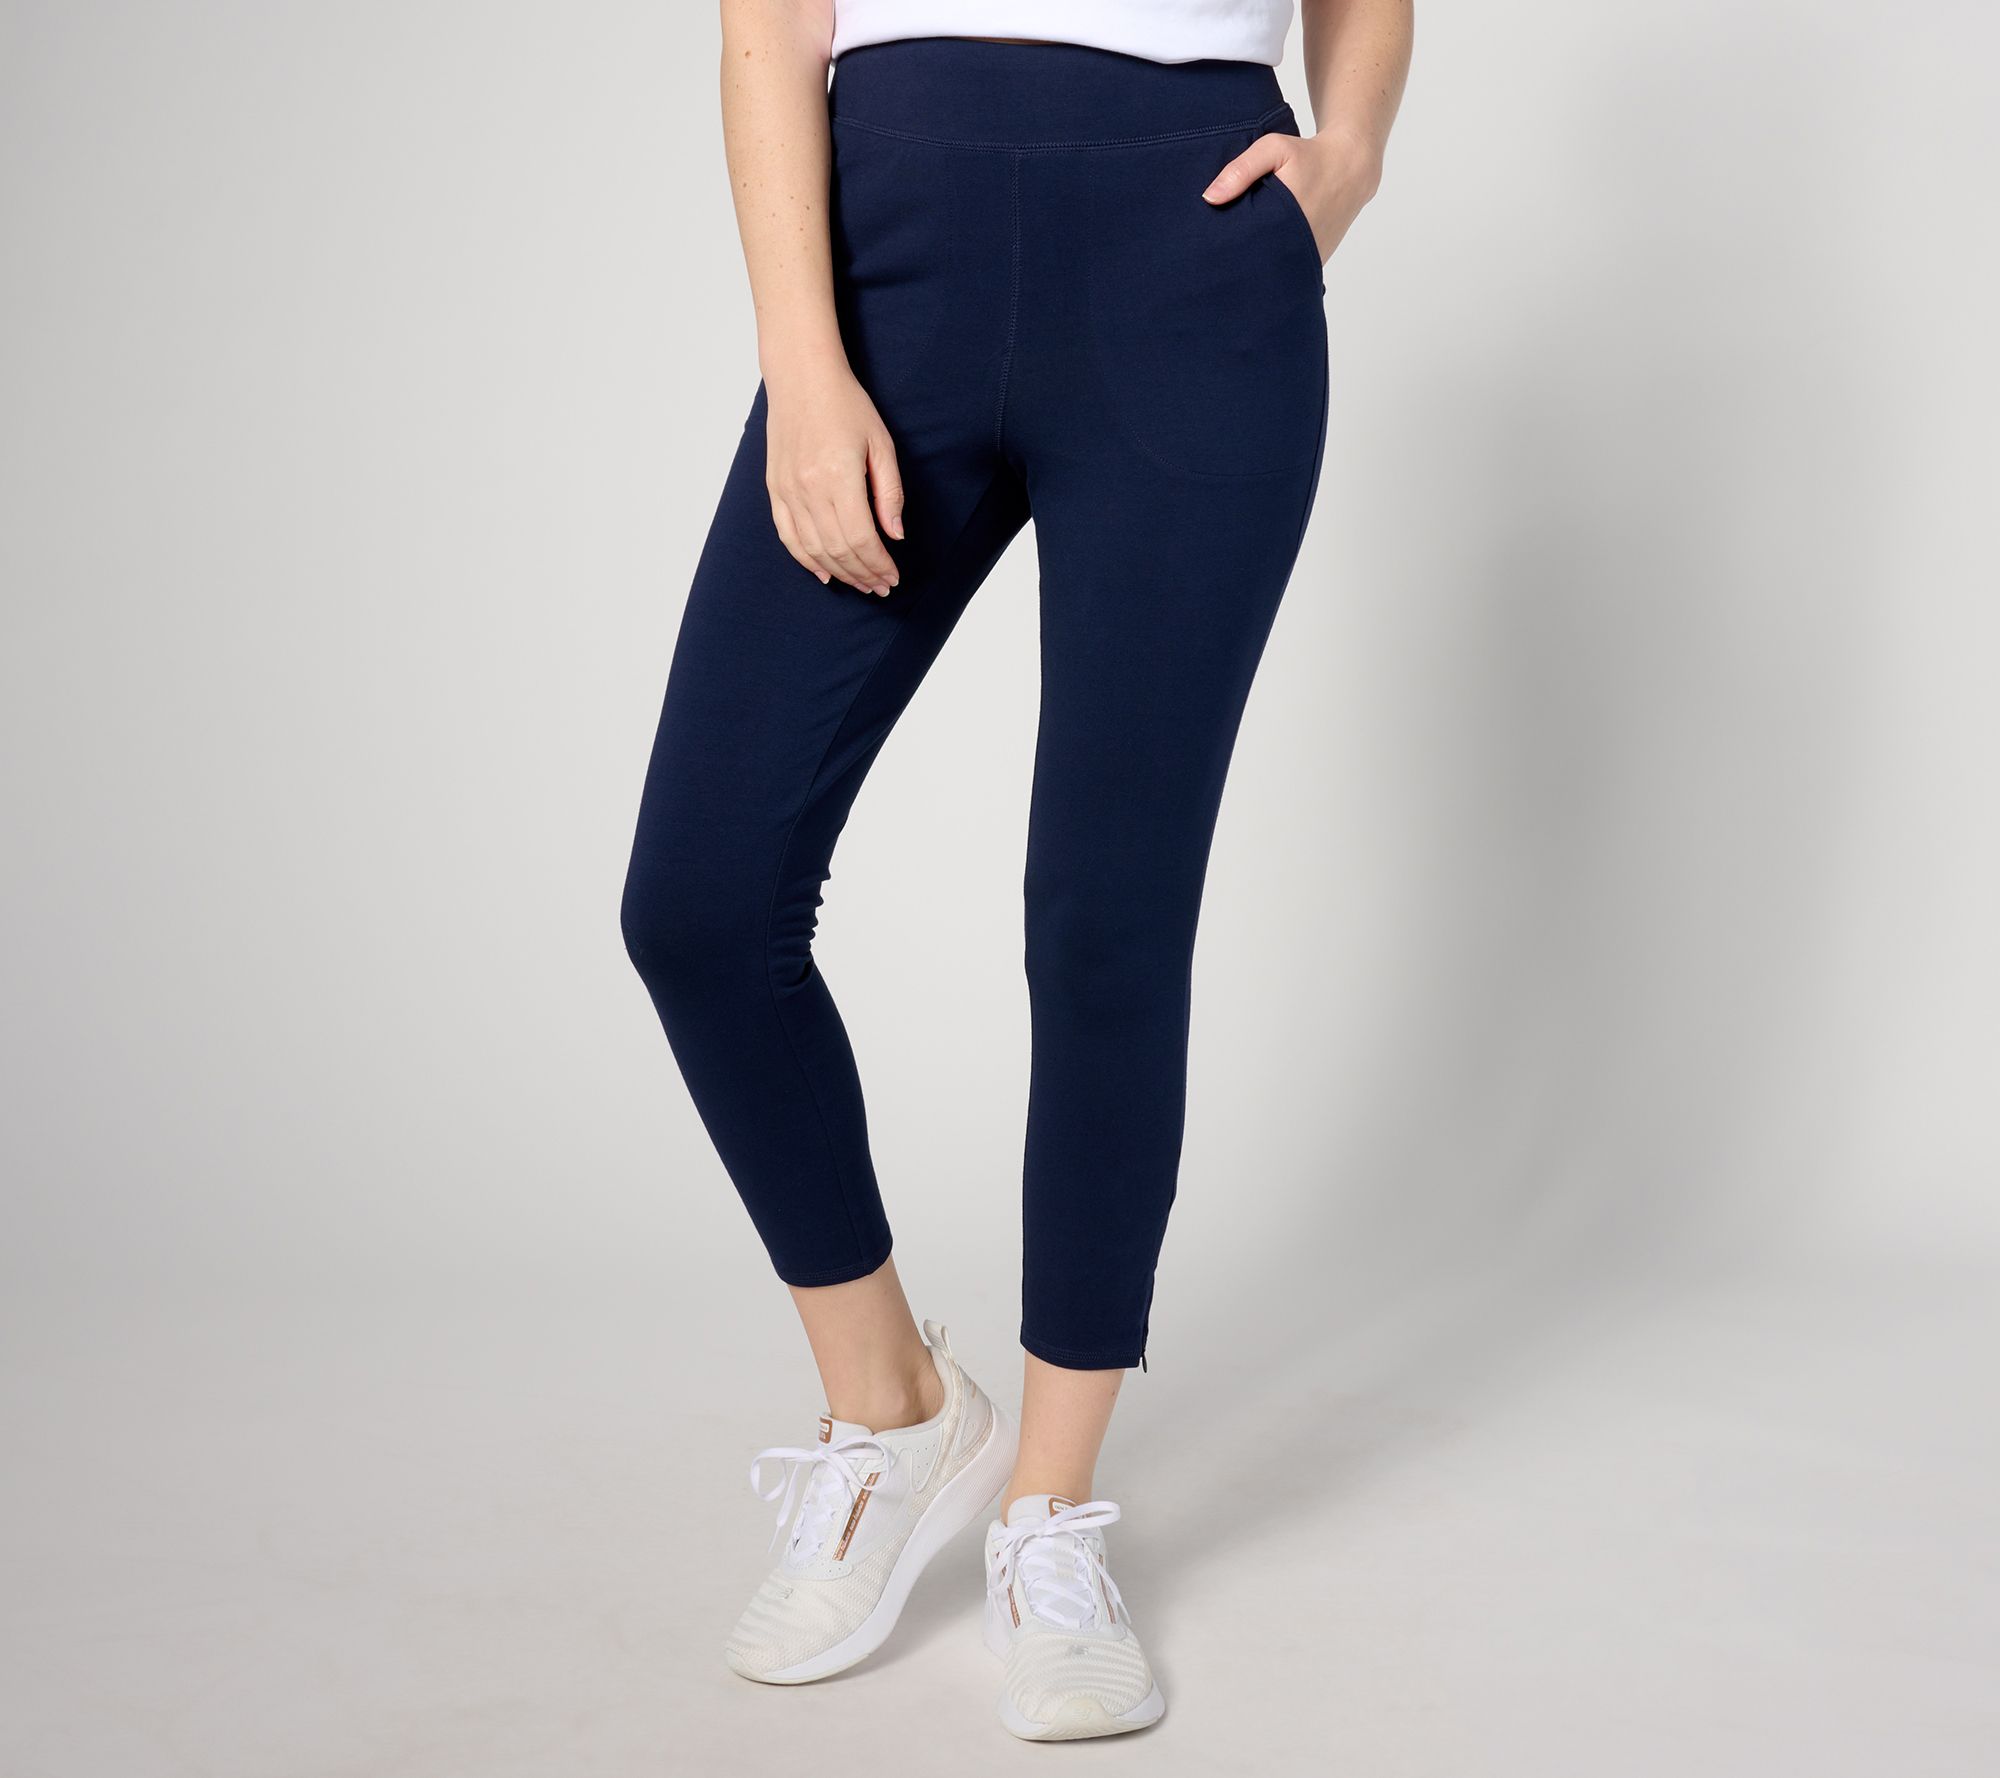 Denim & Co. Active Duo-Stretch Leggings with Back Seam on QVC